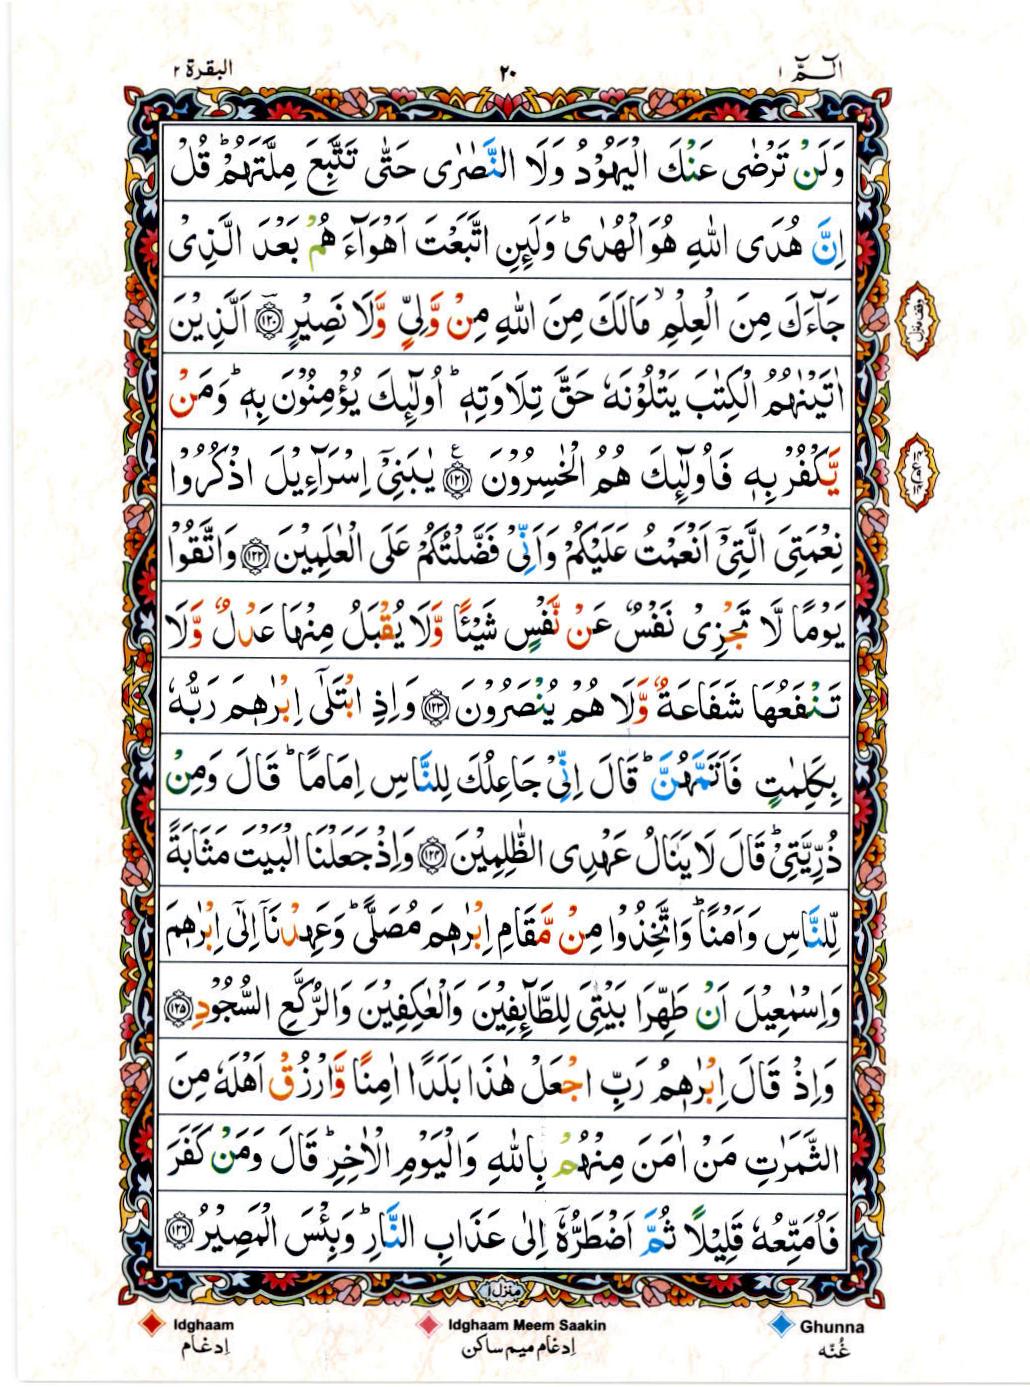 Read 15 Lines Coloured Coded Quran Part 1 Page No 20, Practice Quran